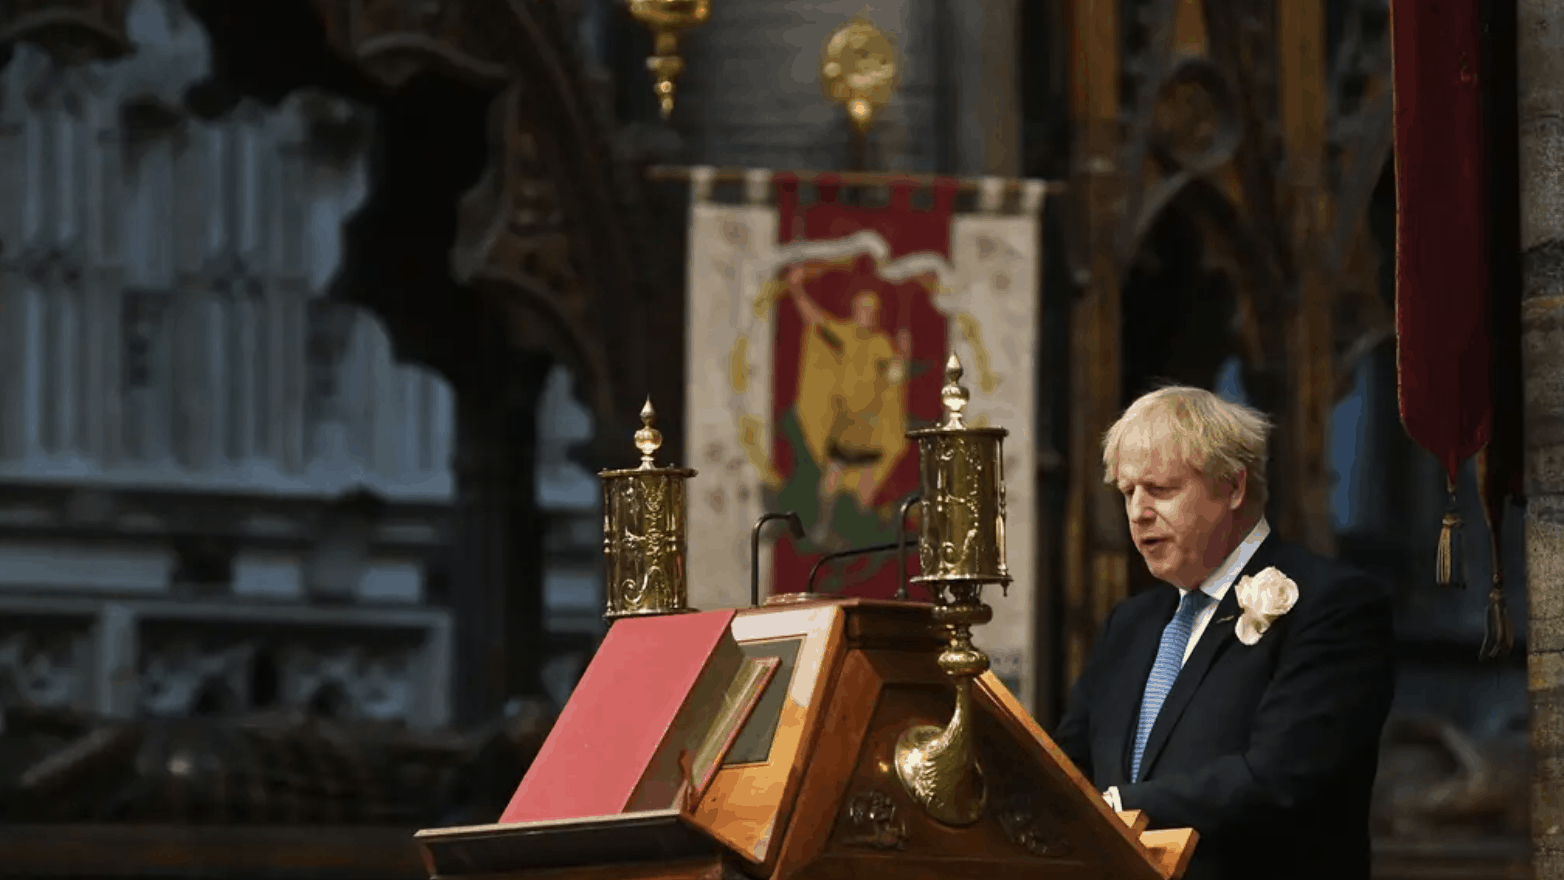 “Never never never trust a Tory,” senior Bishop preaches